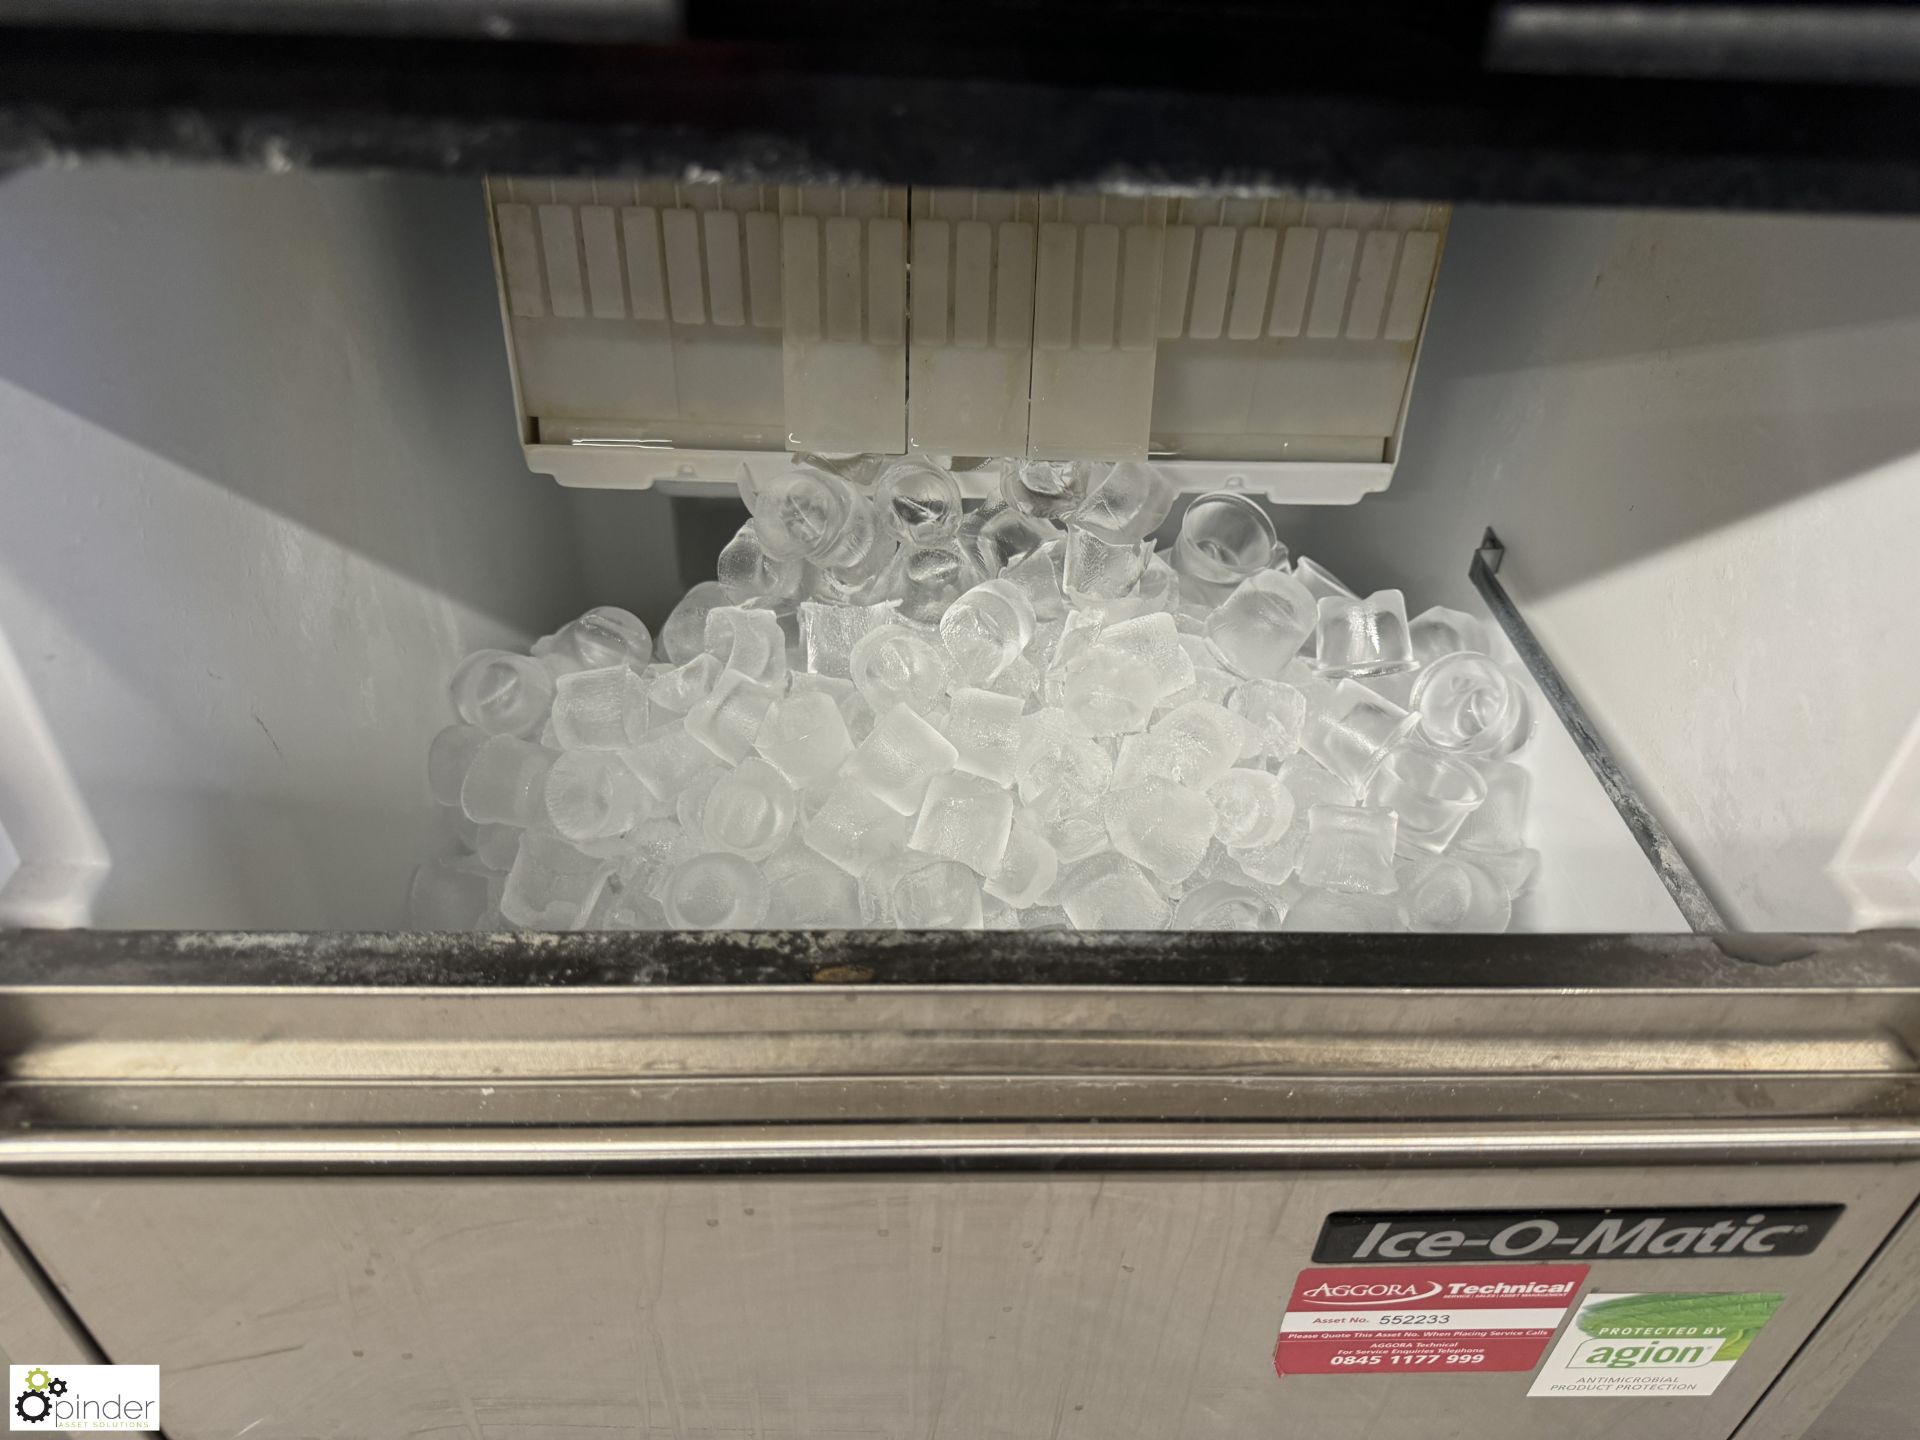 Ice-O-Matic stainless steel under counter Ice Machine, 240volts (location in building - level 11 - Image 2 of 3